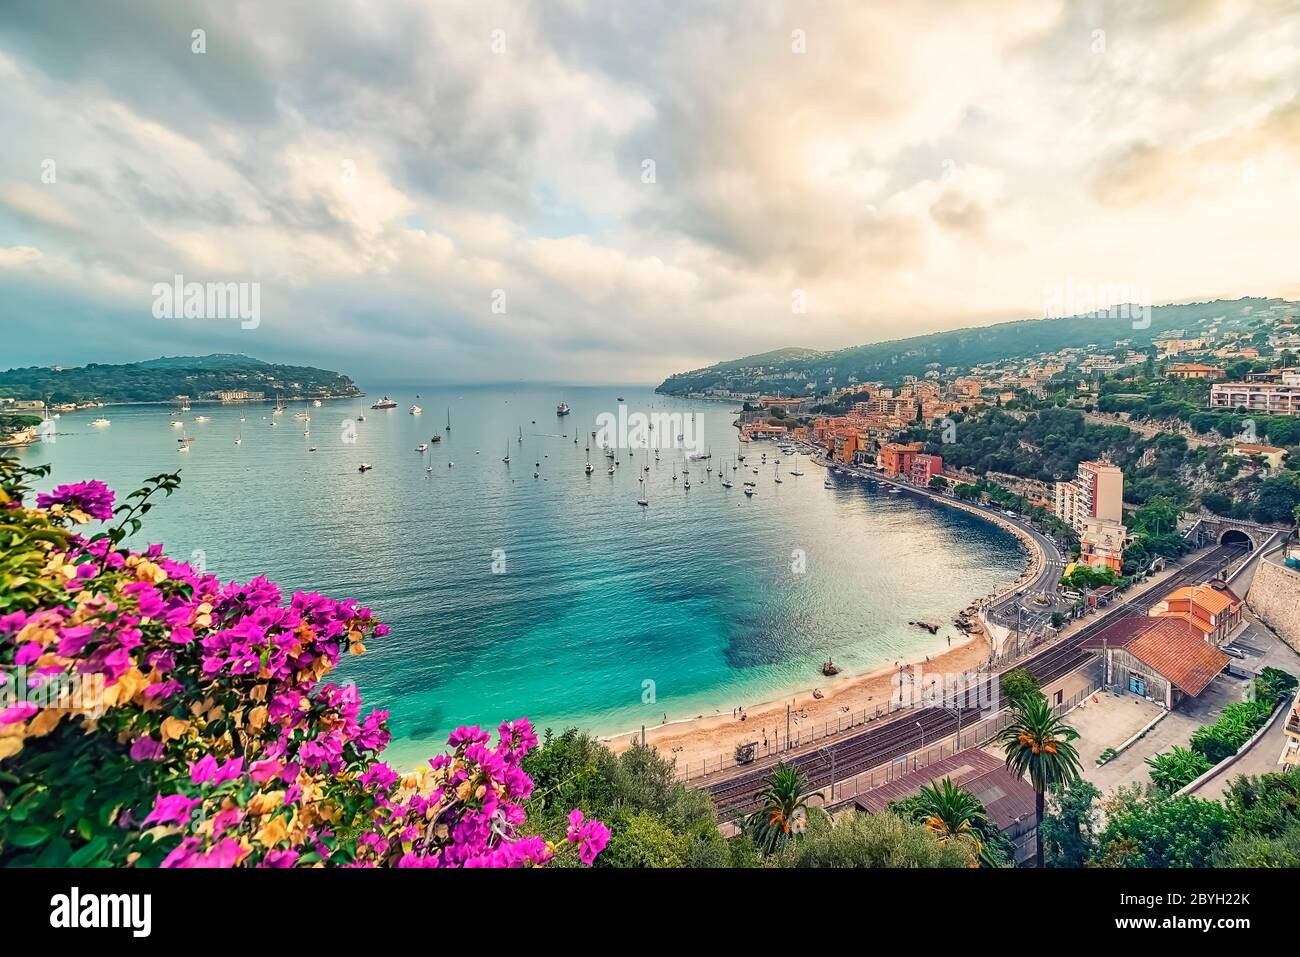 Villefranche-sur-mer on the French Riviera in summer Stock Photo